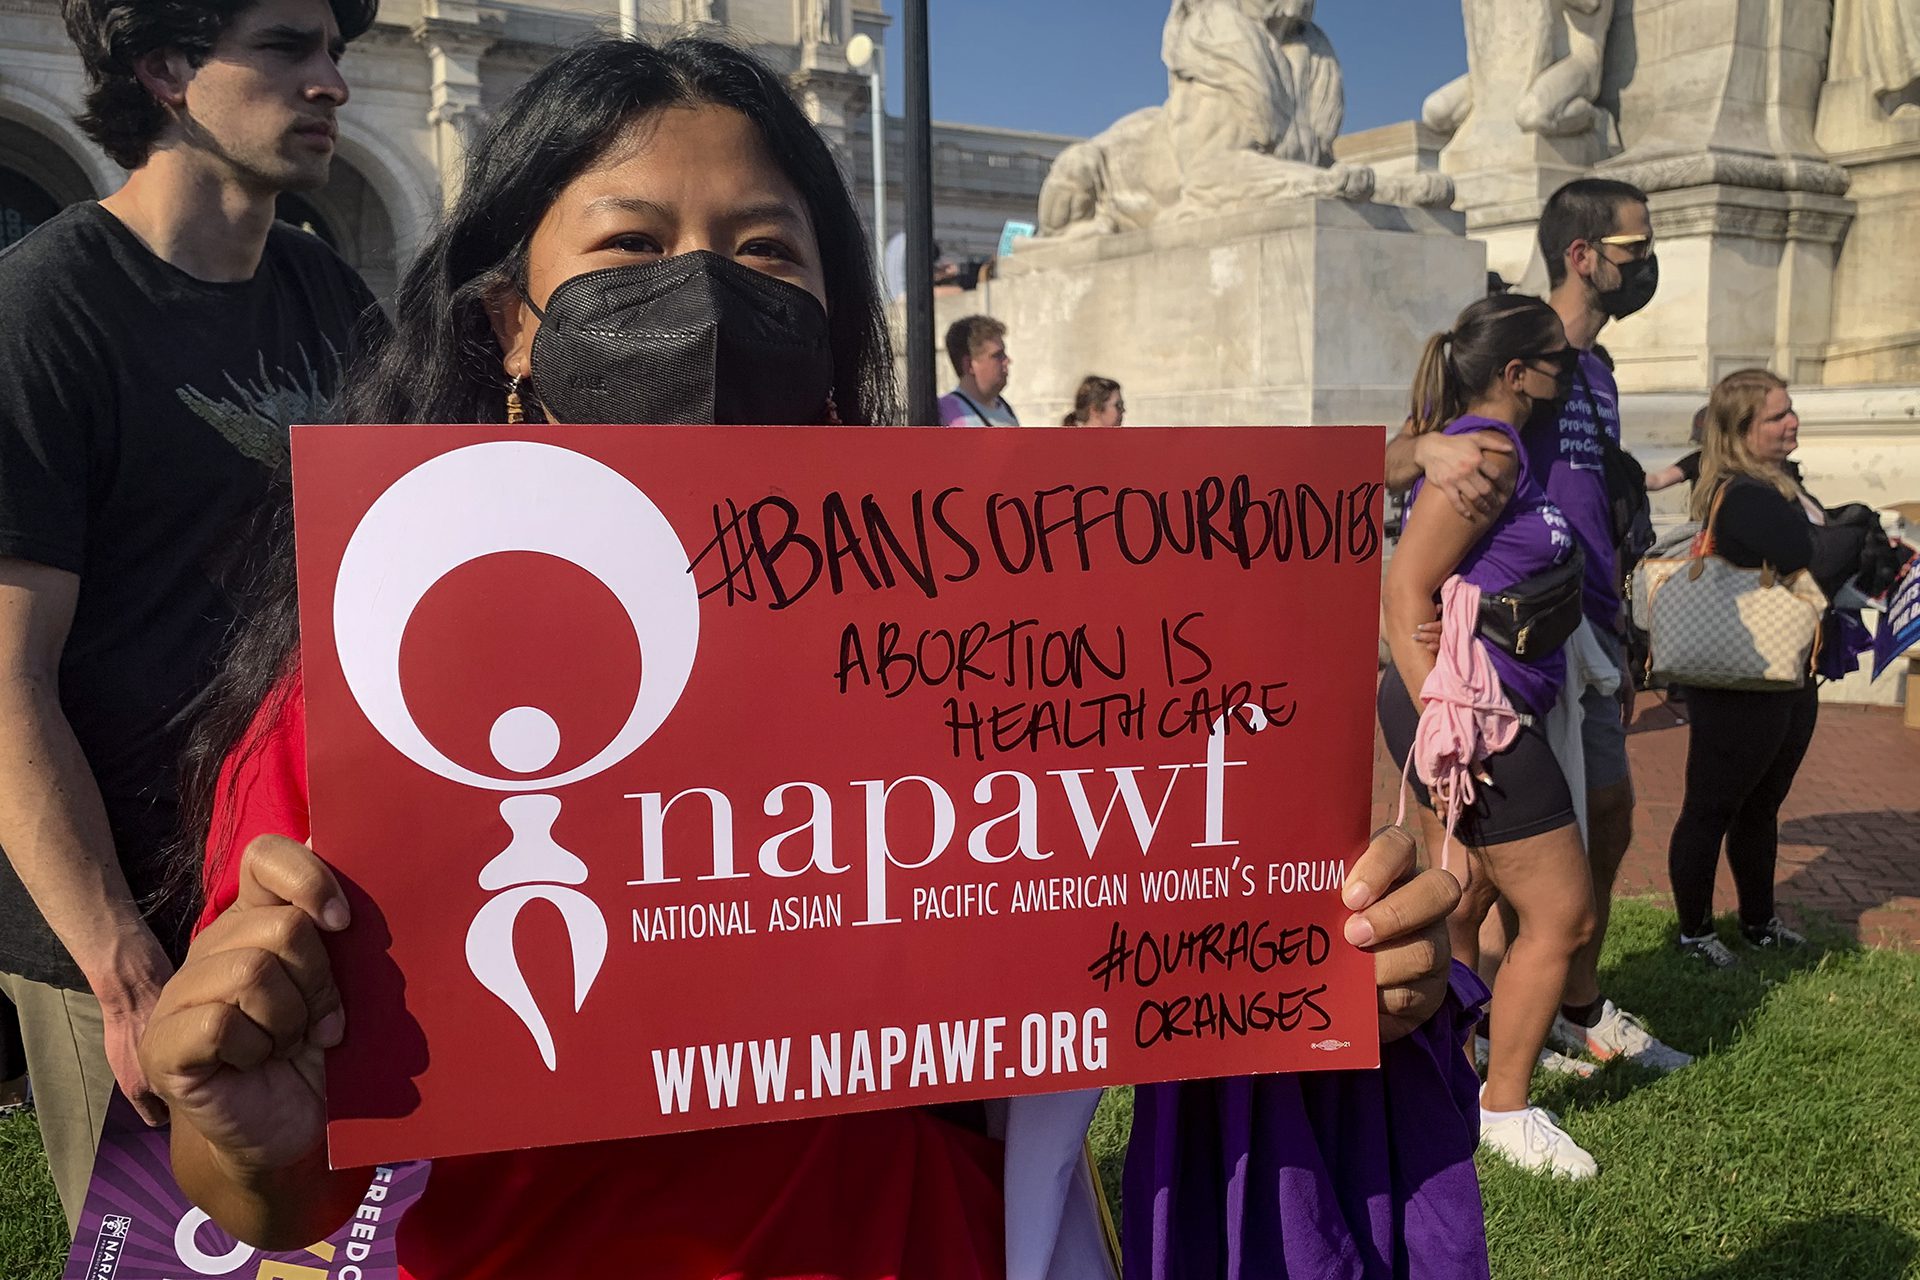 May Thach holds a red sign that reads "#bansoffourbodies" "abortion is heathcare" "napawf"